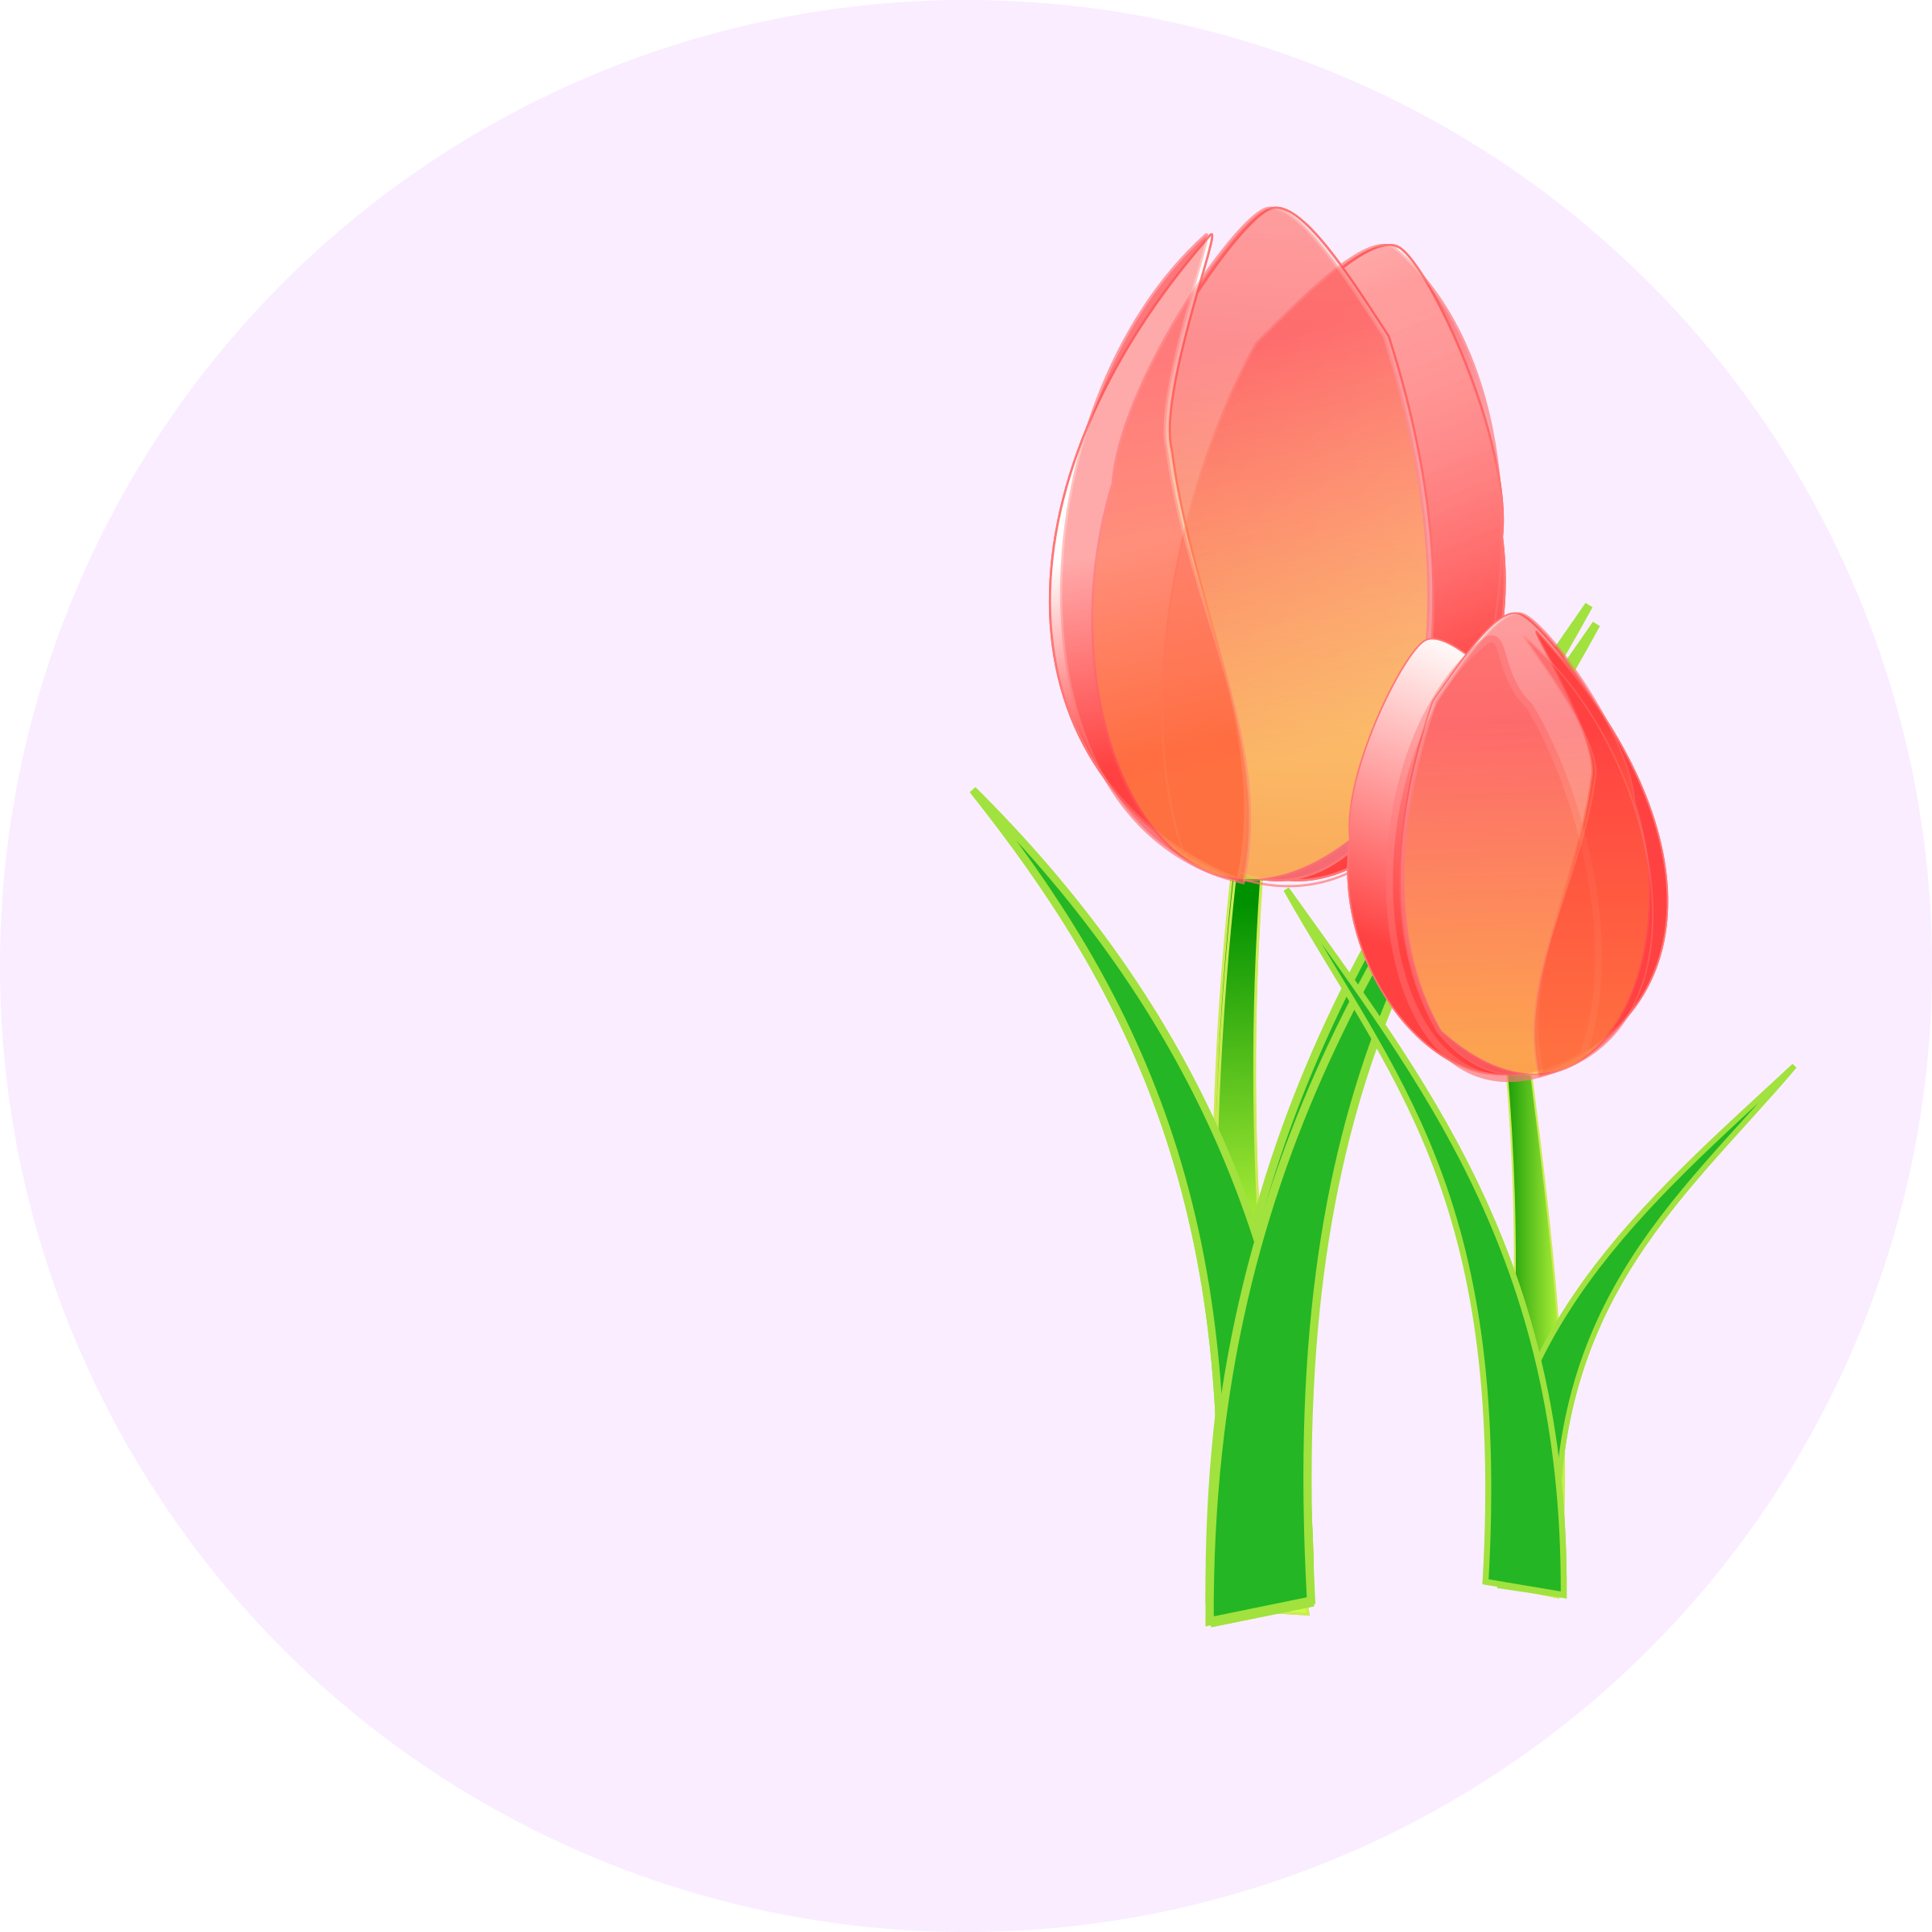 Grass clipart tulip. Tulips big image png